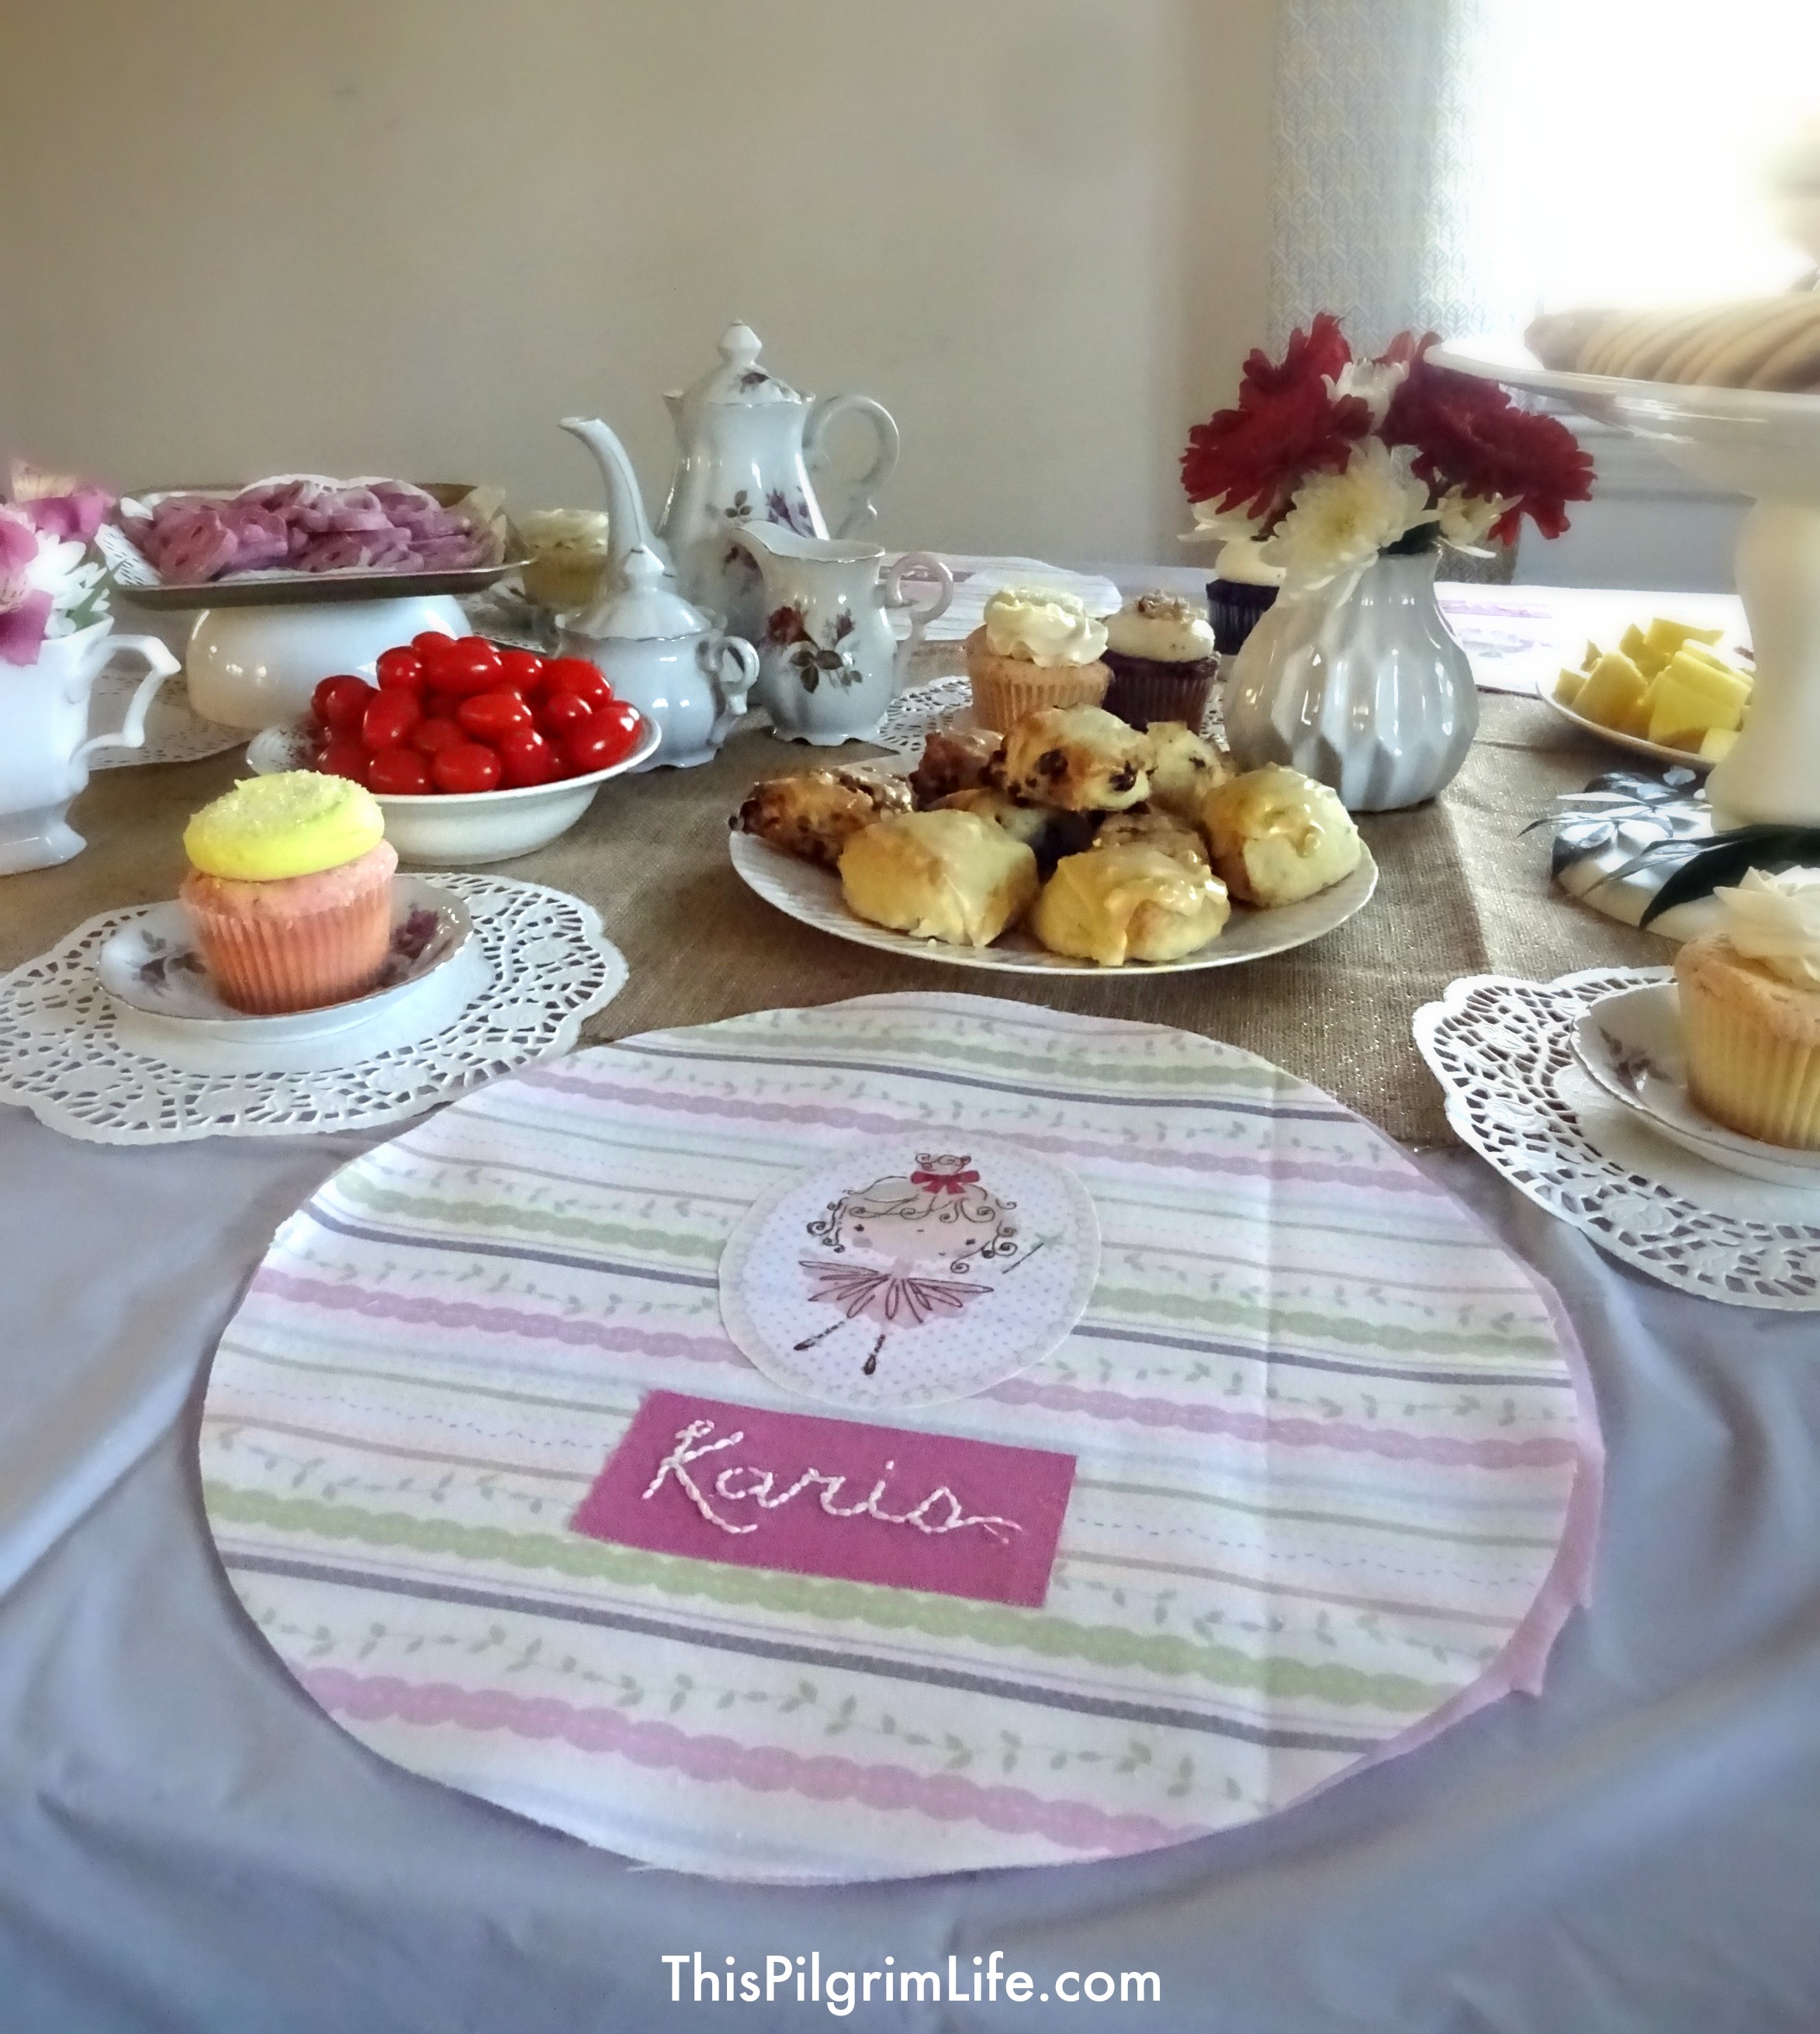 My little girl turned two this week and we celebrated with a very simple tea party. With items from the Dollar Store and Goodwill, I put together a pretty, yet inexpensive, party with a handful of her friends. 